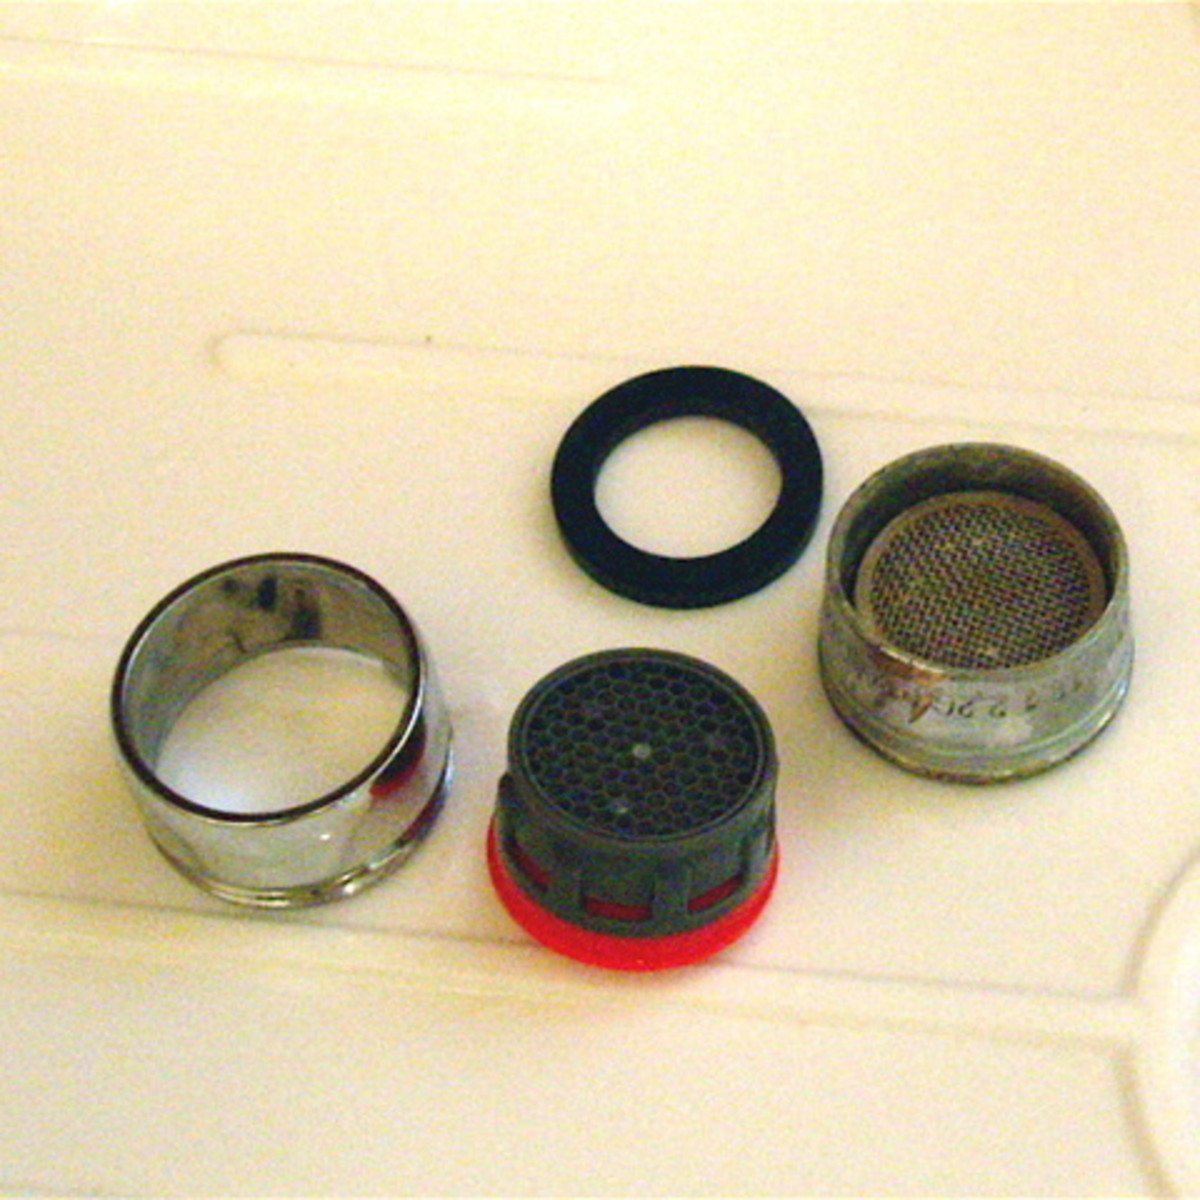 Replace your old faucet aerator with a new, low-flow one. Note that the new one is plastic, whereas the old one is steel mesh that rusted.